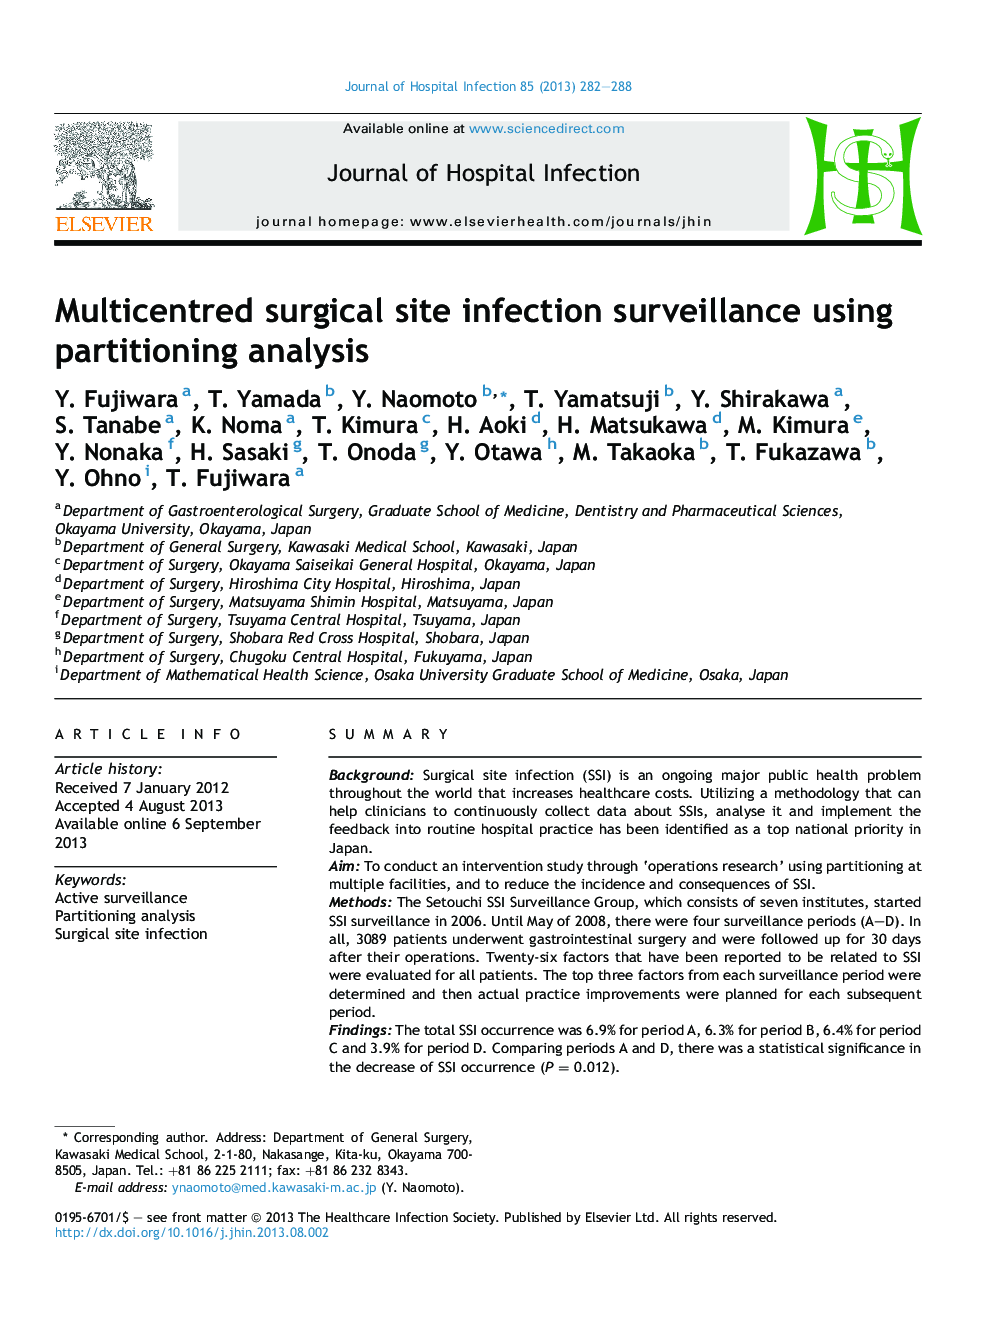 Multicentred surgical site infection surveillance using partitioning analysis